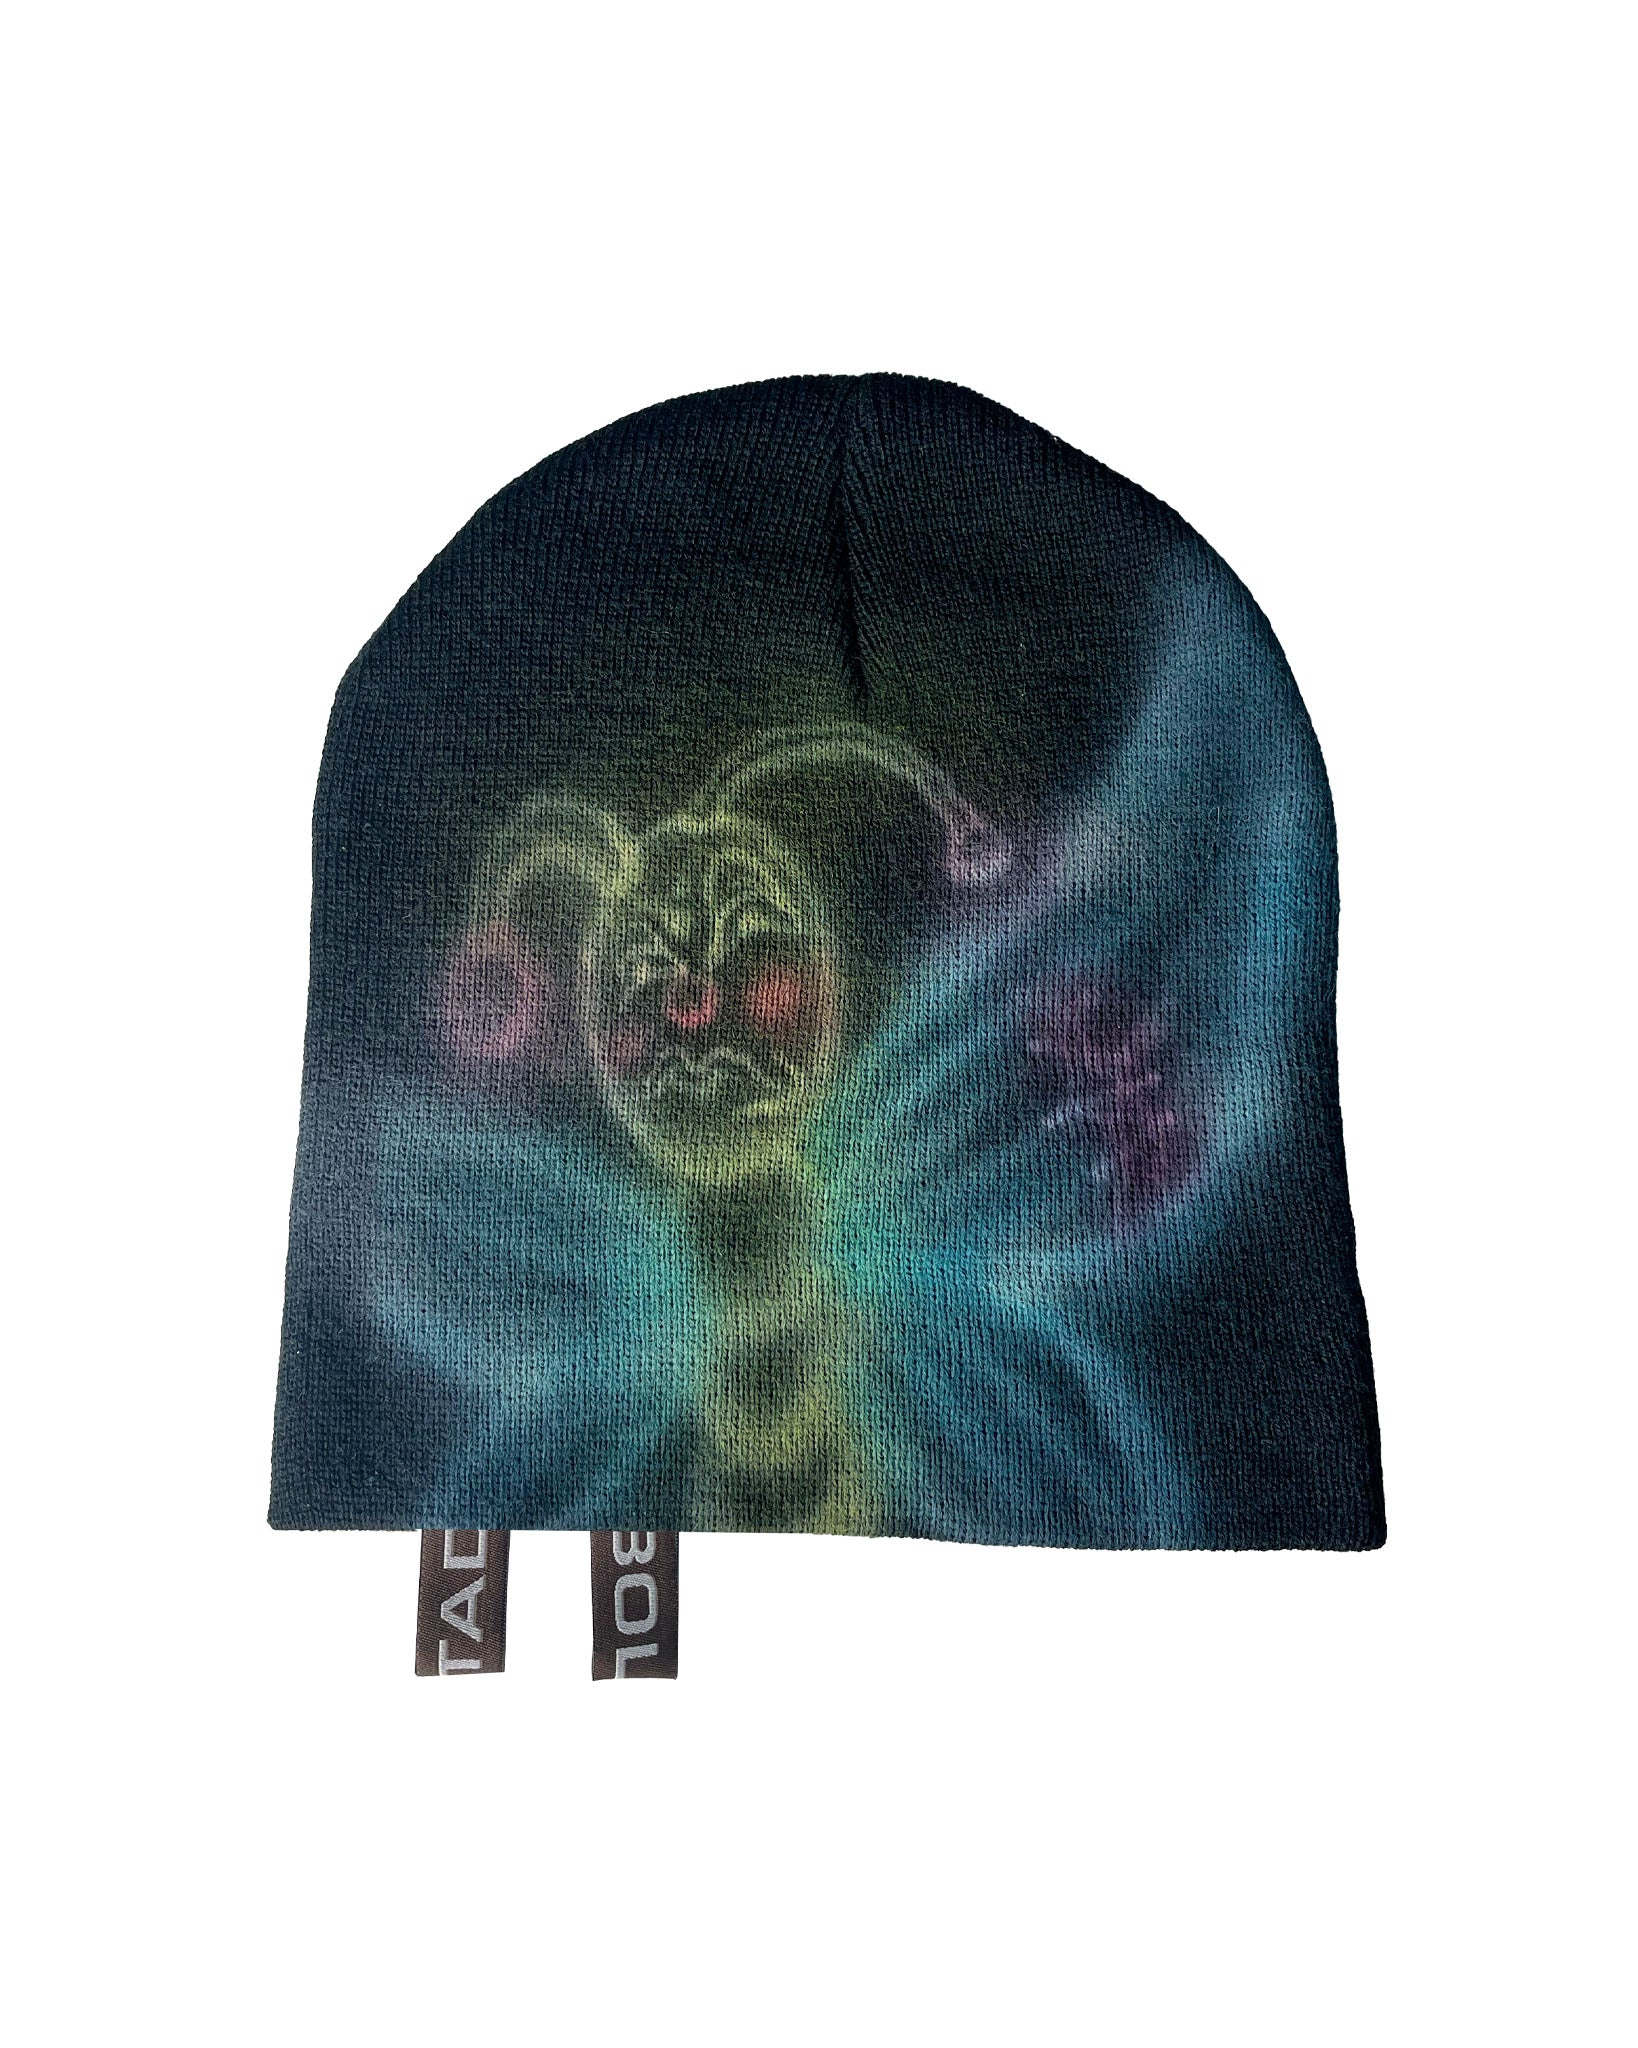 Clown Butterfly Airbrushed Beanie 1/1